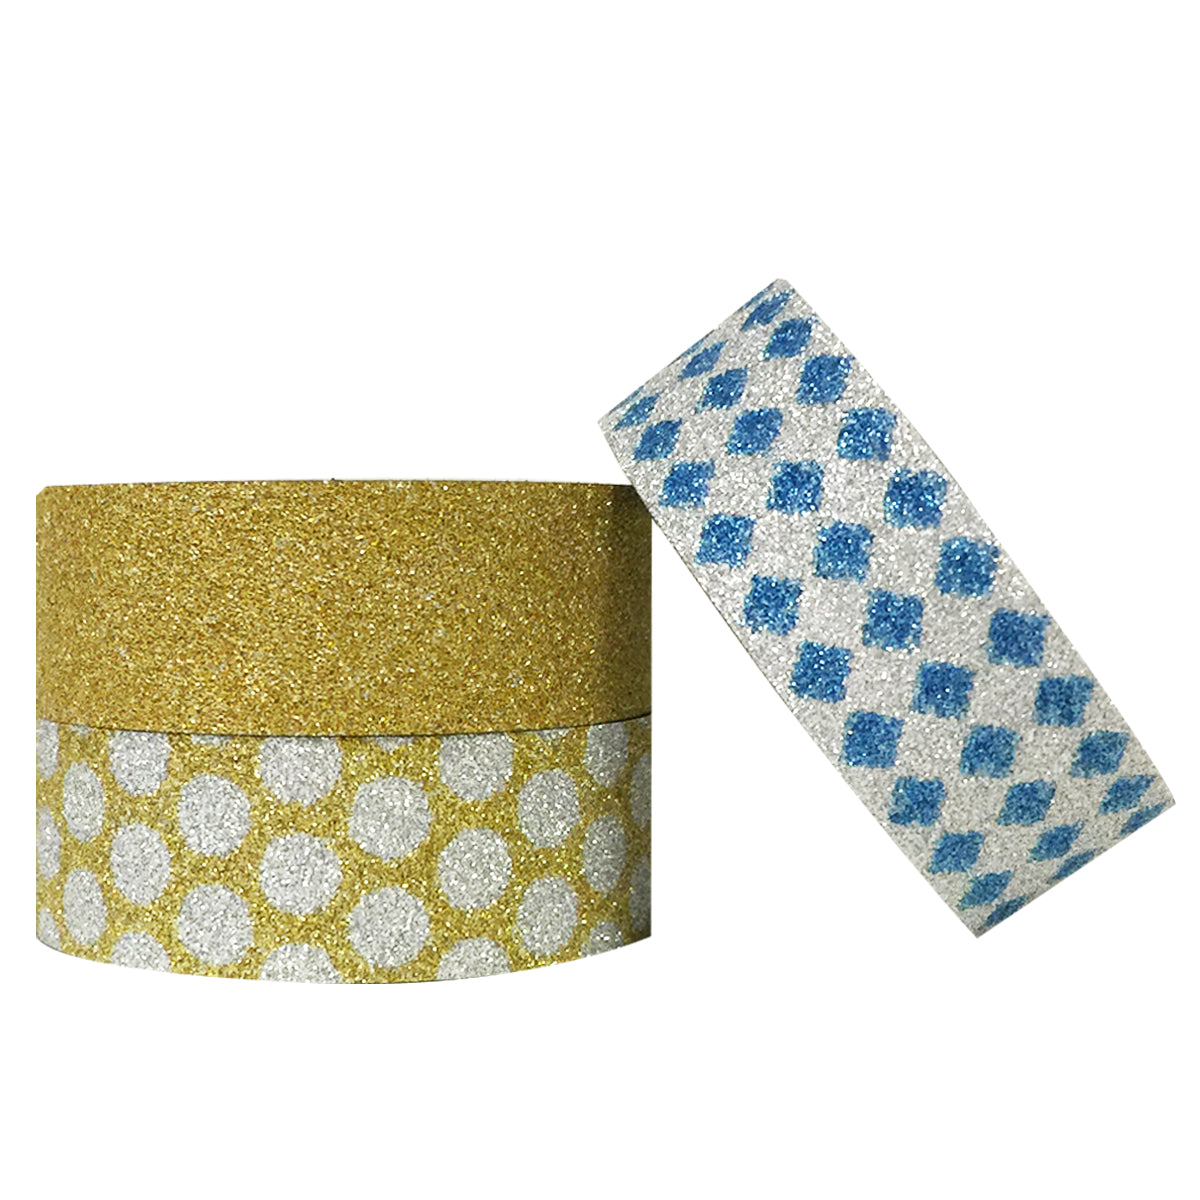 Wrapables Dots and Checkers Washi Masking Tape (Set of 3)